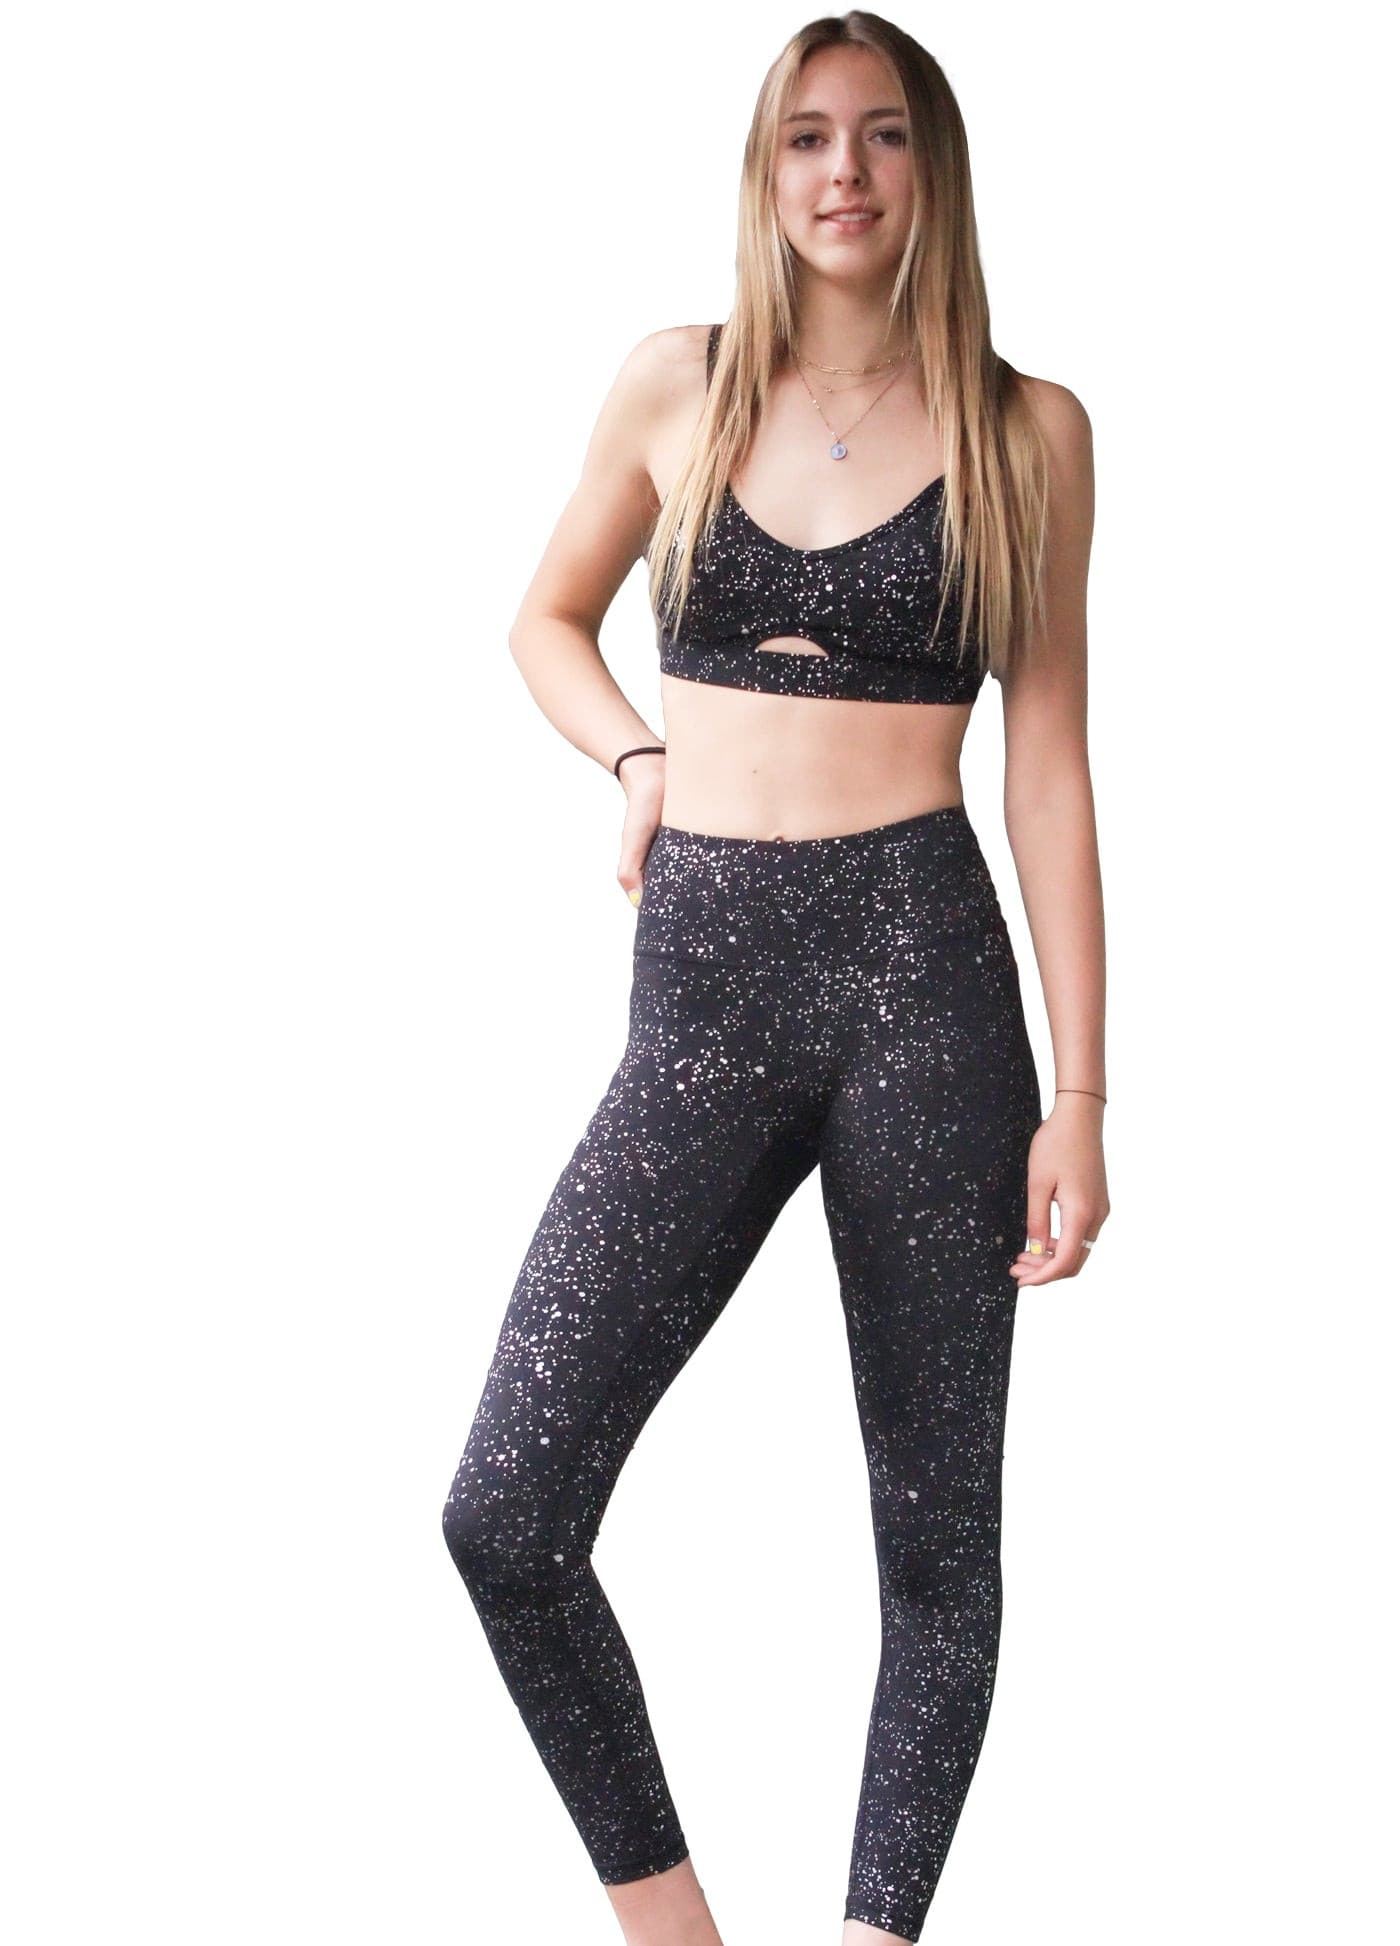 Silver & Rose Gold Sparkle Gabriella Sports Bra - Full Coverage Removable Cup Wirefree Bras for Yoga Training & Gym Workout.